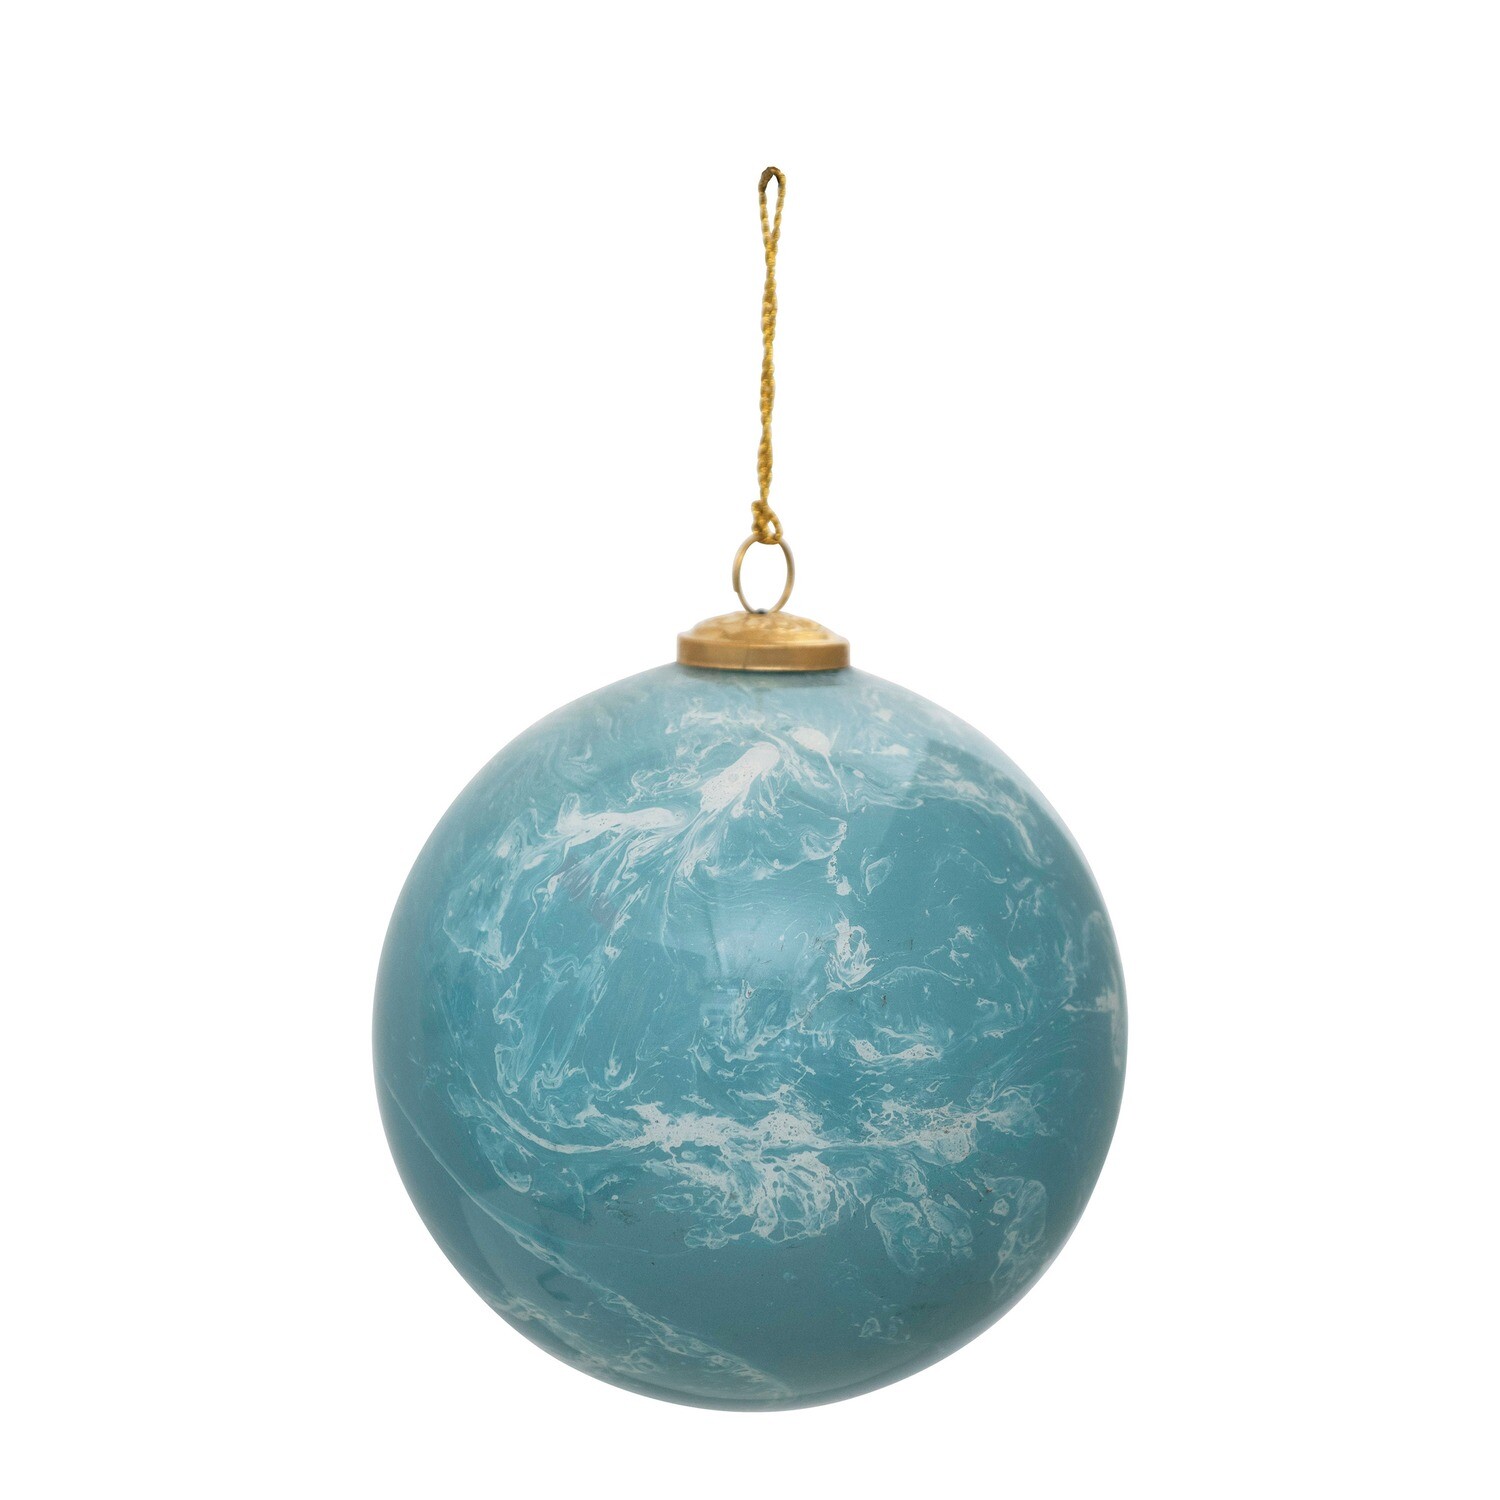 6" Marbled Blue Ornament